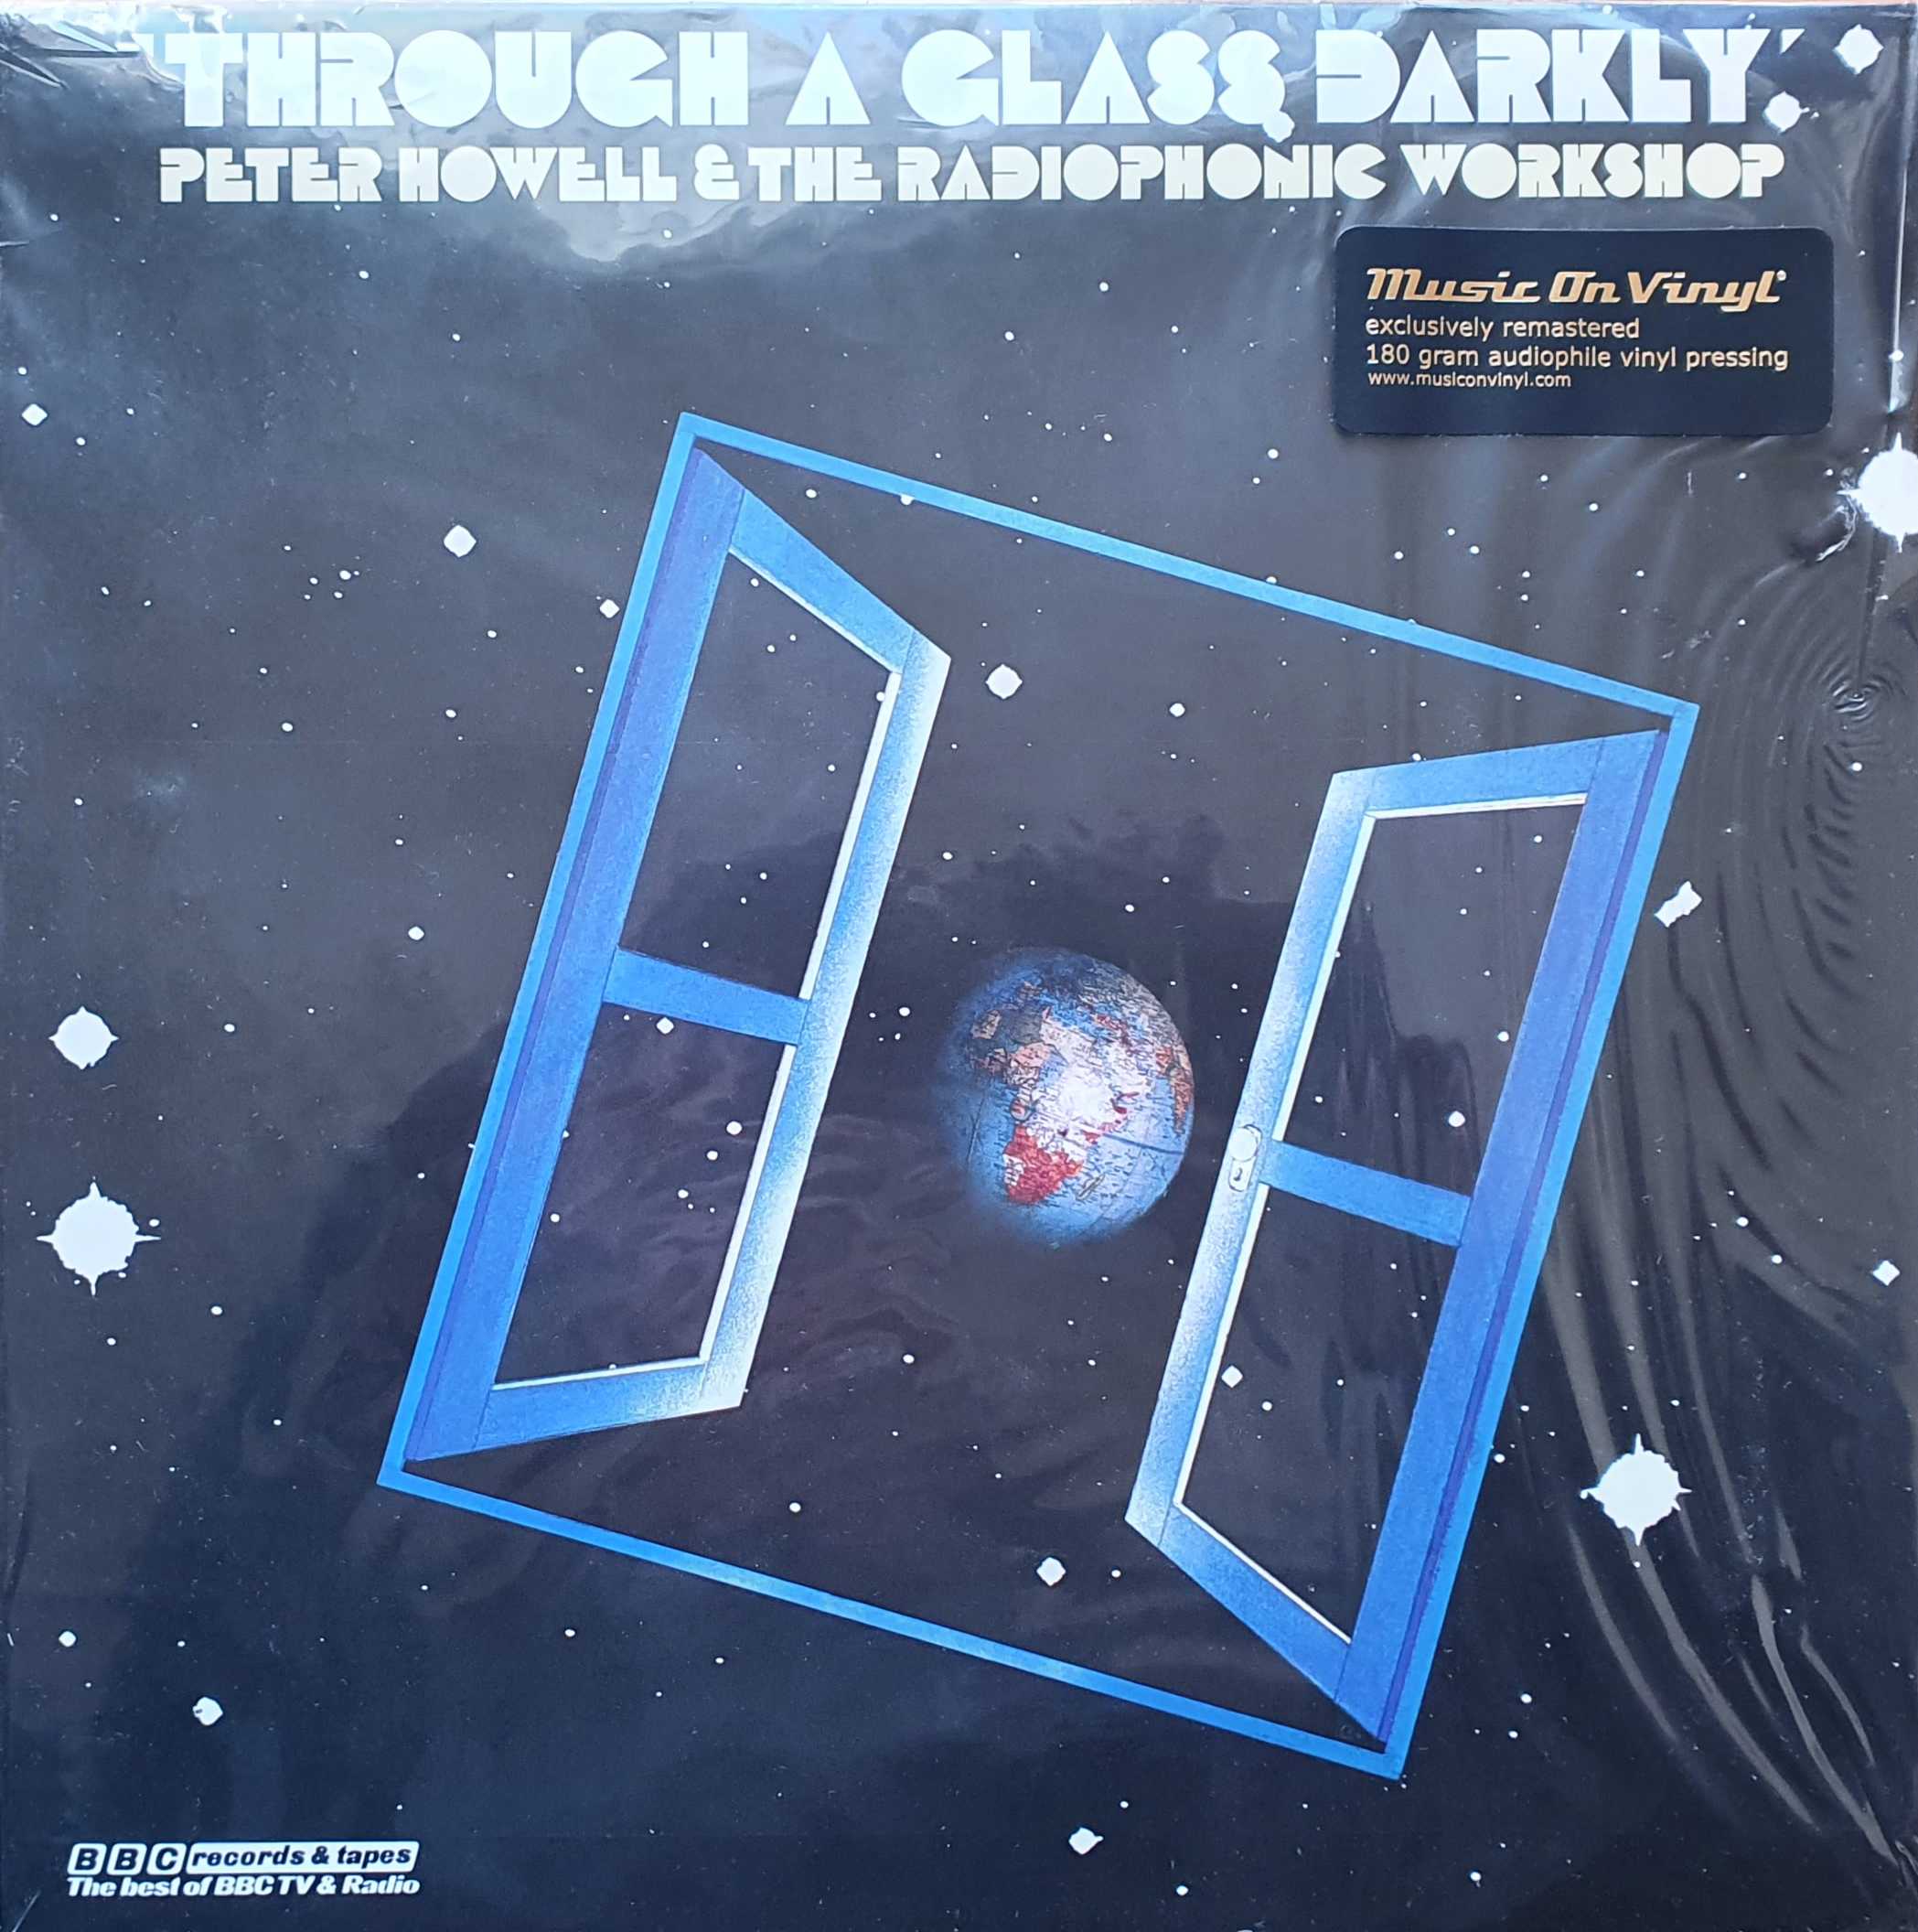 Picture of MOVLP 1036 Through a glass darkly by artist Peter Howell / BBC Radiophonic Workshop from the BBC records and Tapes library